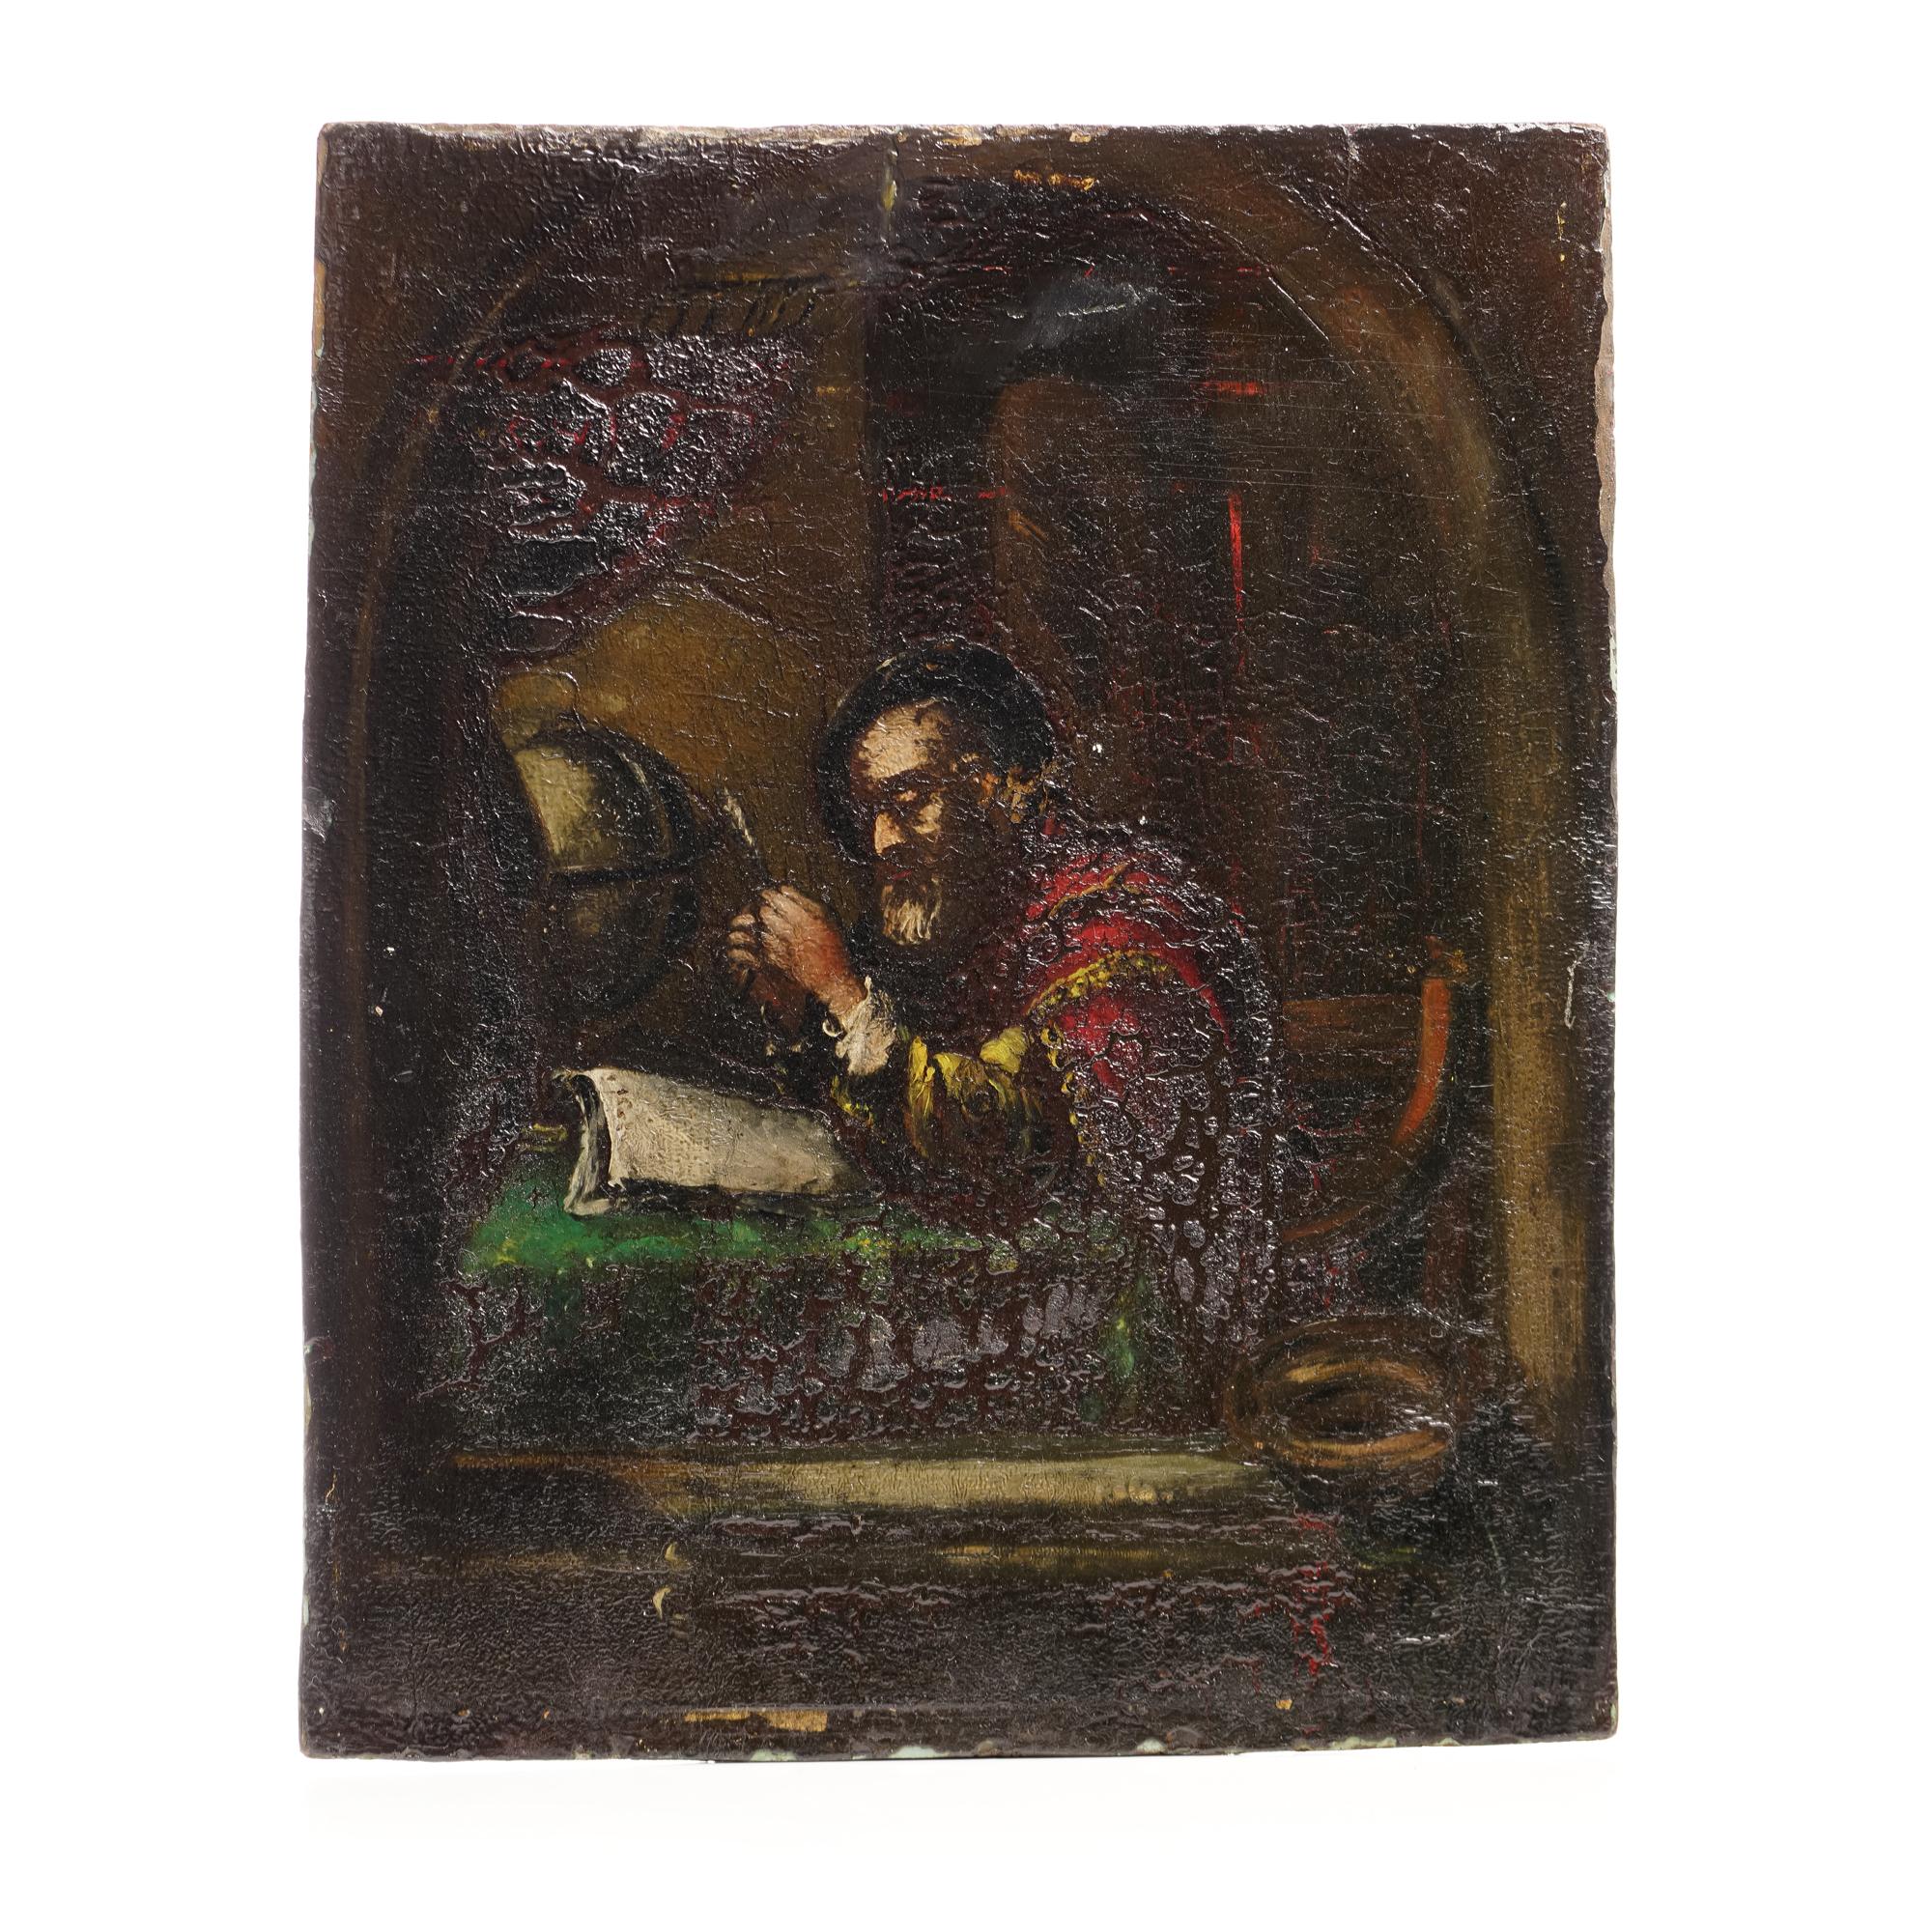 16th Century Oil on Wood Panel: ' Scholar in Solitude ' 

This painting portrays a solitary scholar seated at a table, immersed in the pages of an open book. Beside him rests a globe, symbolizing his intellectual pursuits and curiosity about the